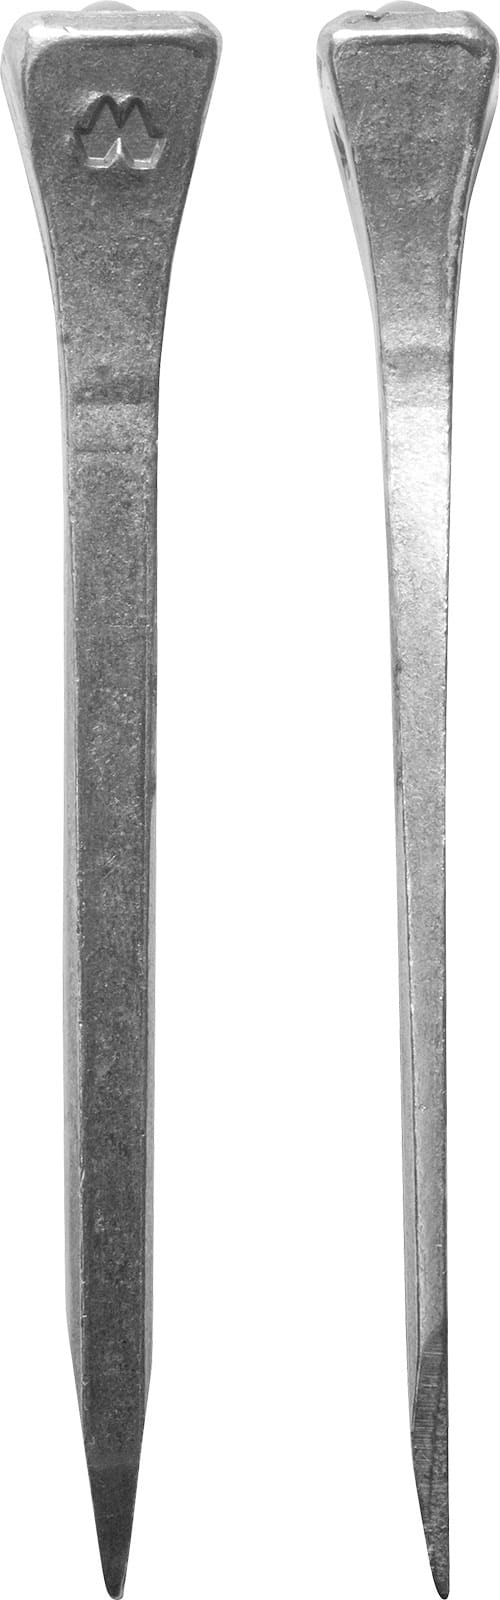 Mustad Road Nail E, front and side views